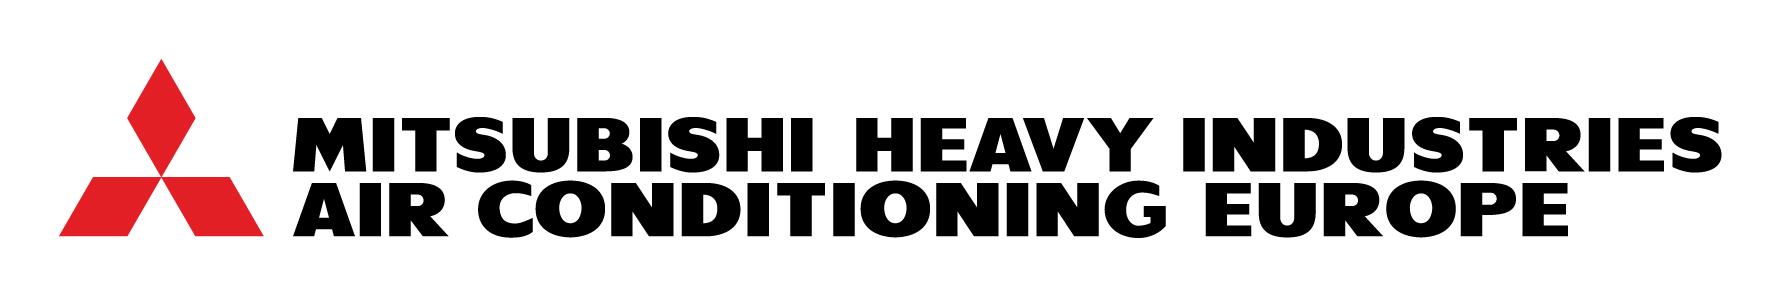 Mitsubishi Heavy Industries Air Conditioning Europe